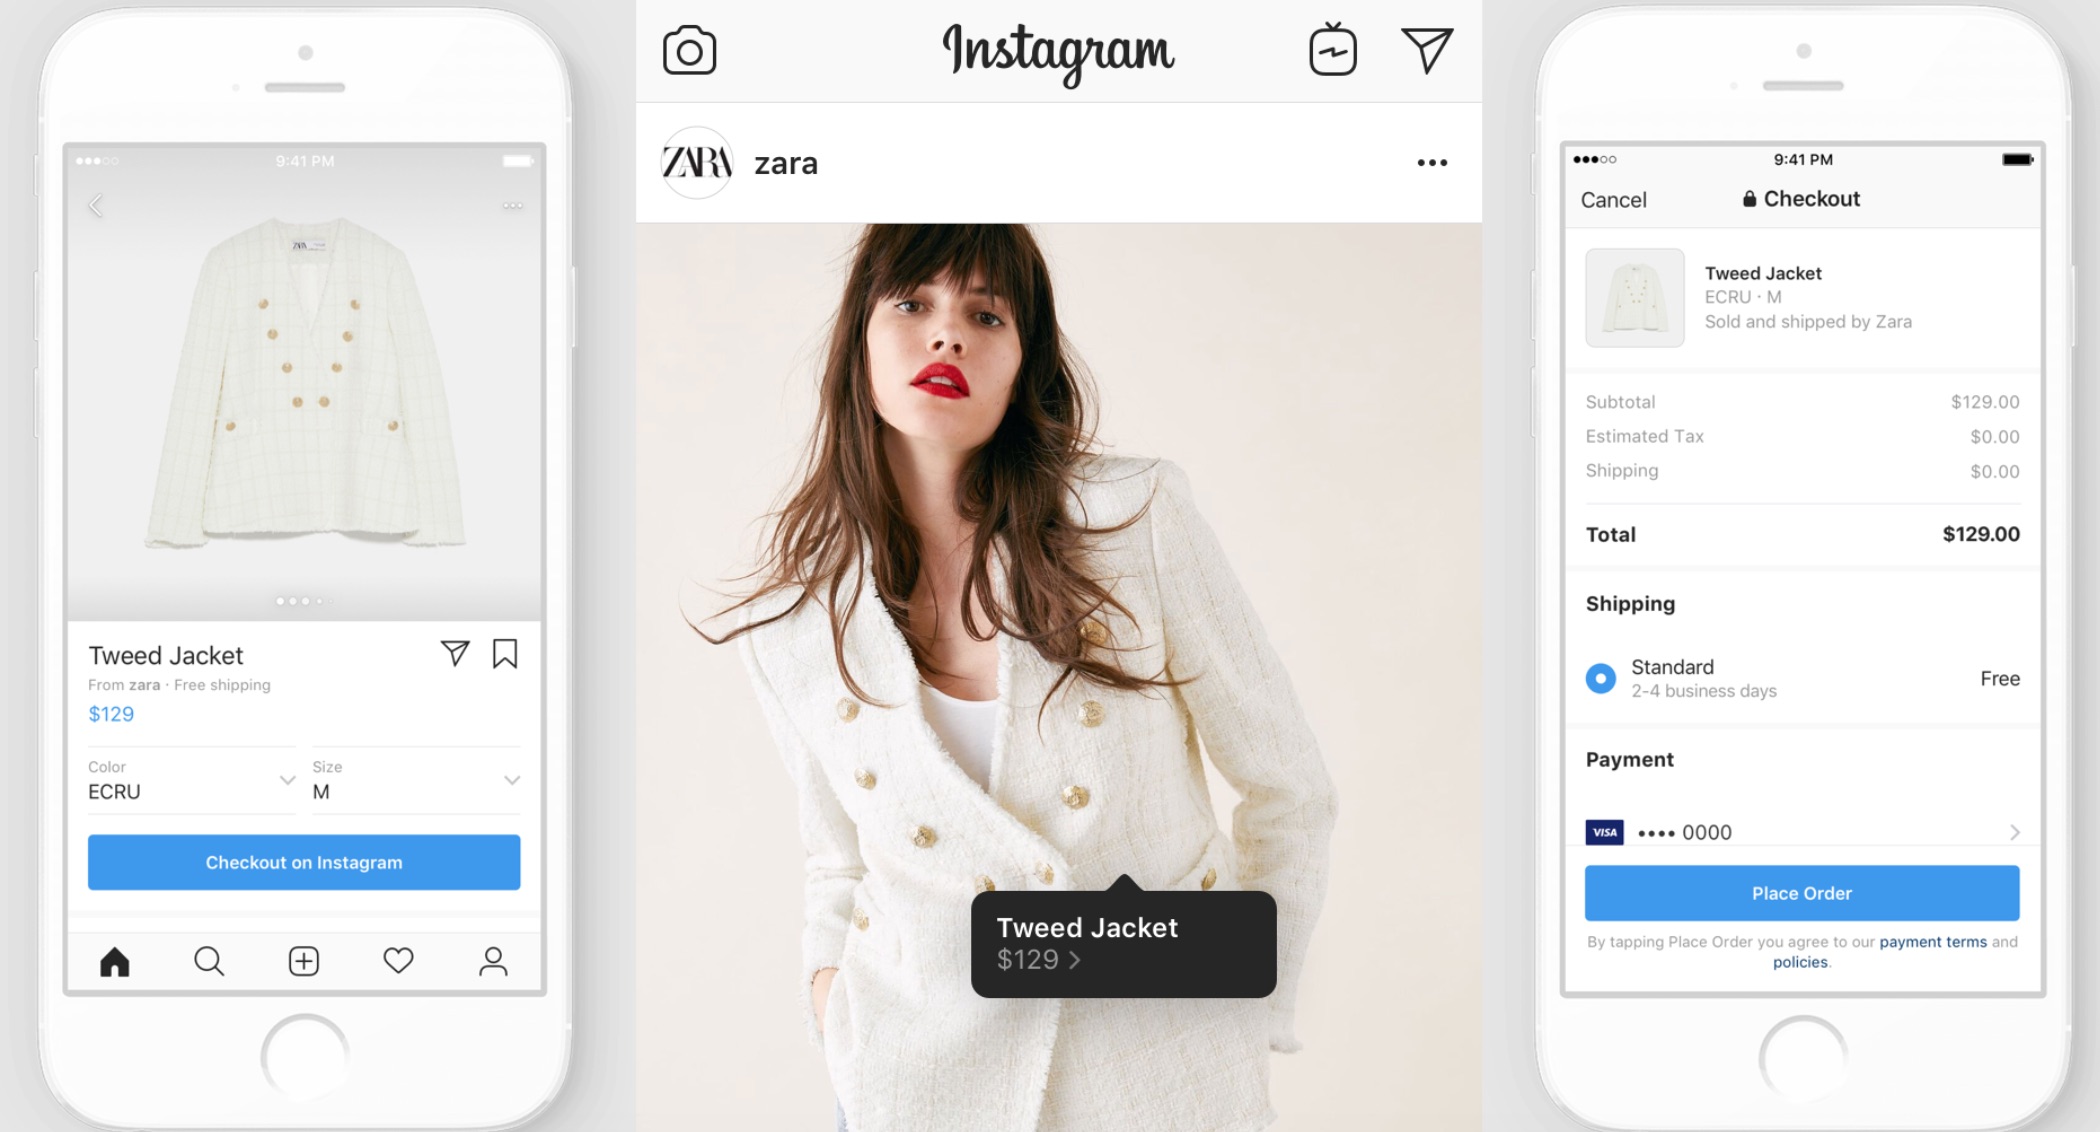 Schedule Instagram posts with product tags in Vista Social